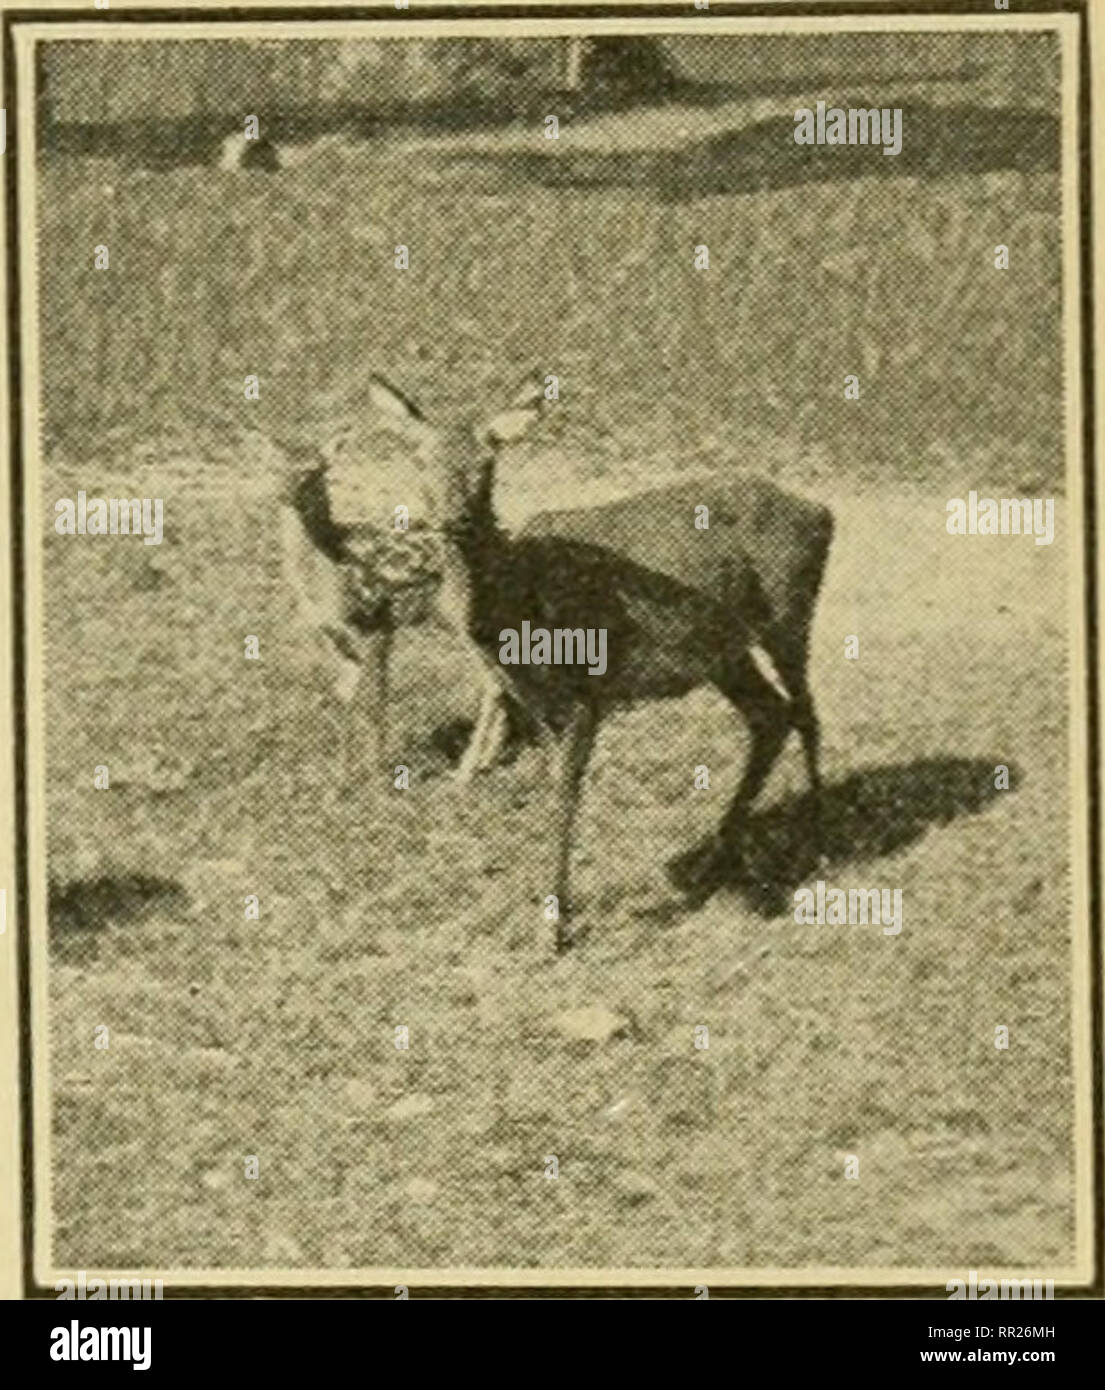 Advanced biology. Biology; Physiology; Reproduction. CHAPTER REPRODUCTION  OF ANIMALS. iV. Y. Zoological Soc. The buck has antlers. A', i'. Zoological  Sac. A doe with her fawn. Is the reproduction of an